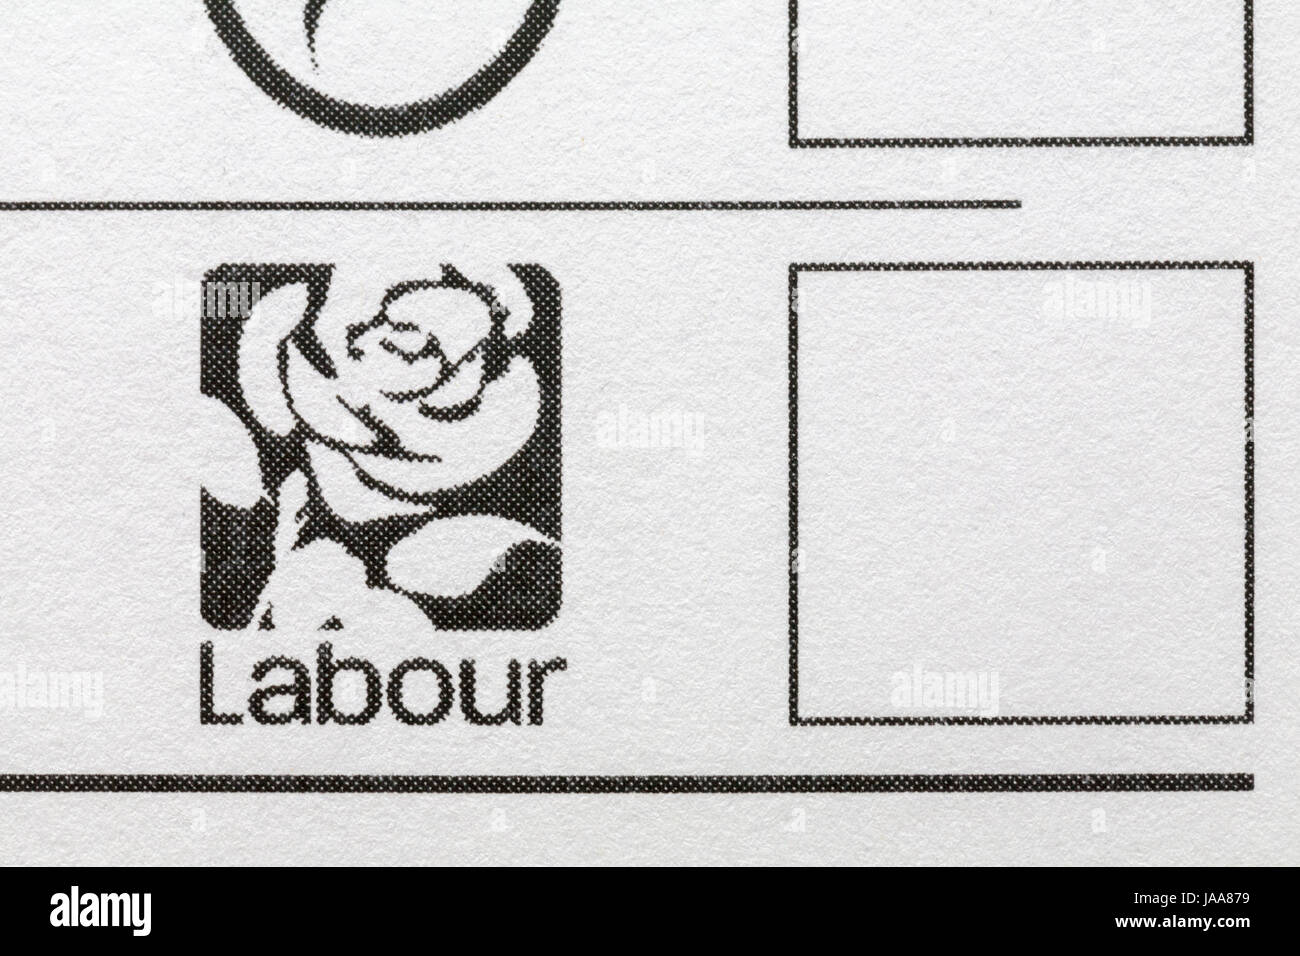 Labour box on Postal Ballot Paper for General Election in the UK on Thursday 8th June 2017 Stock Photo